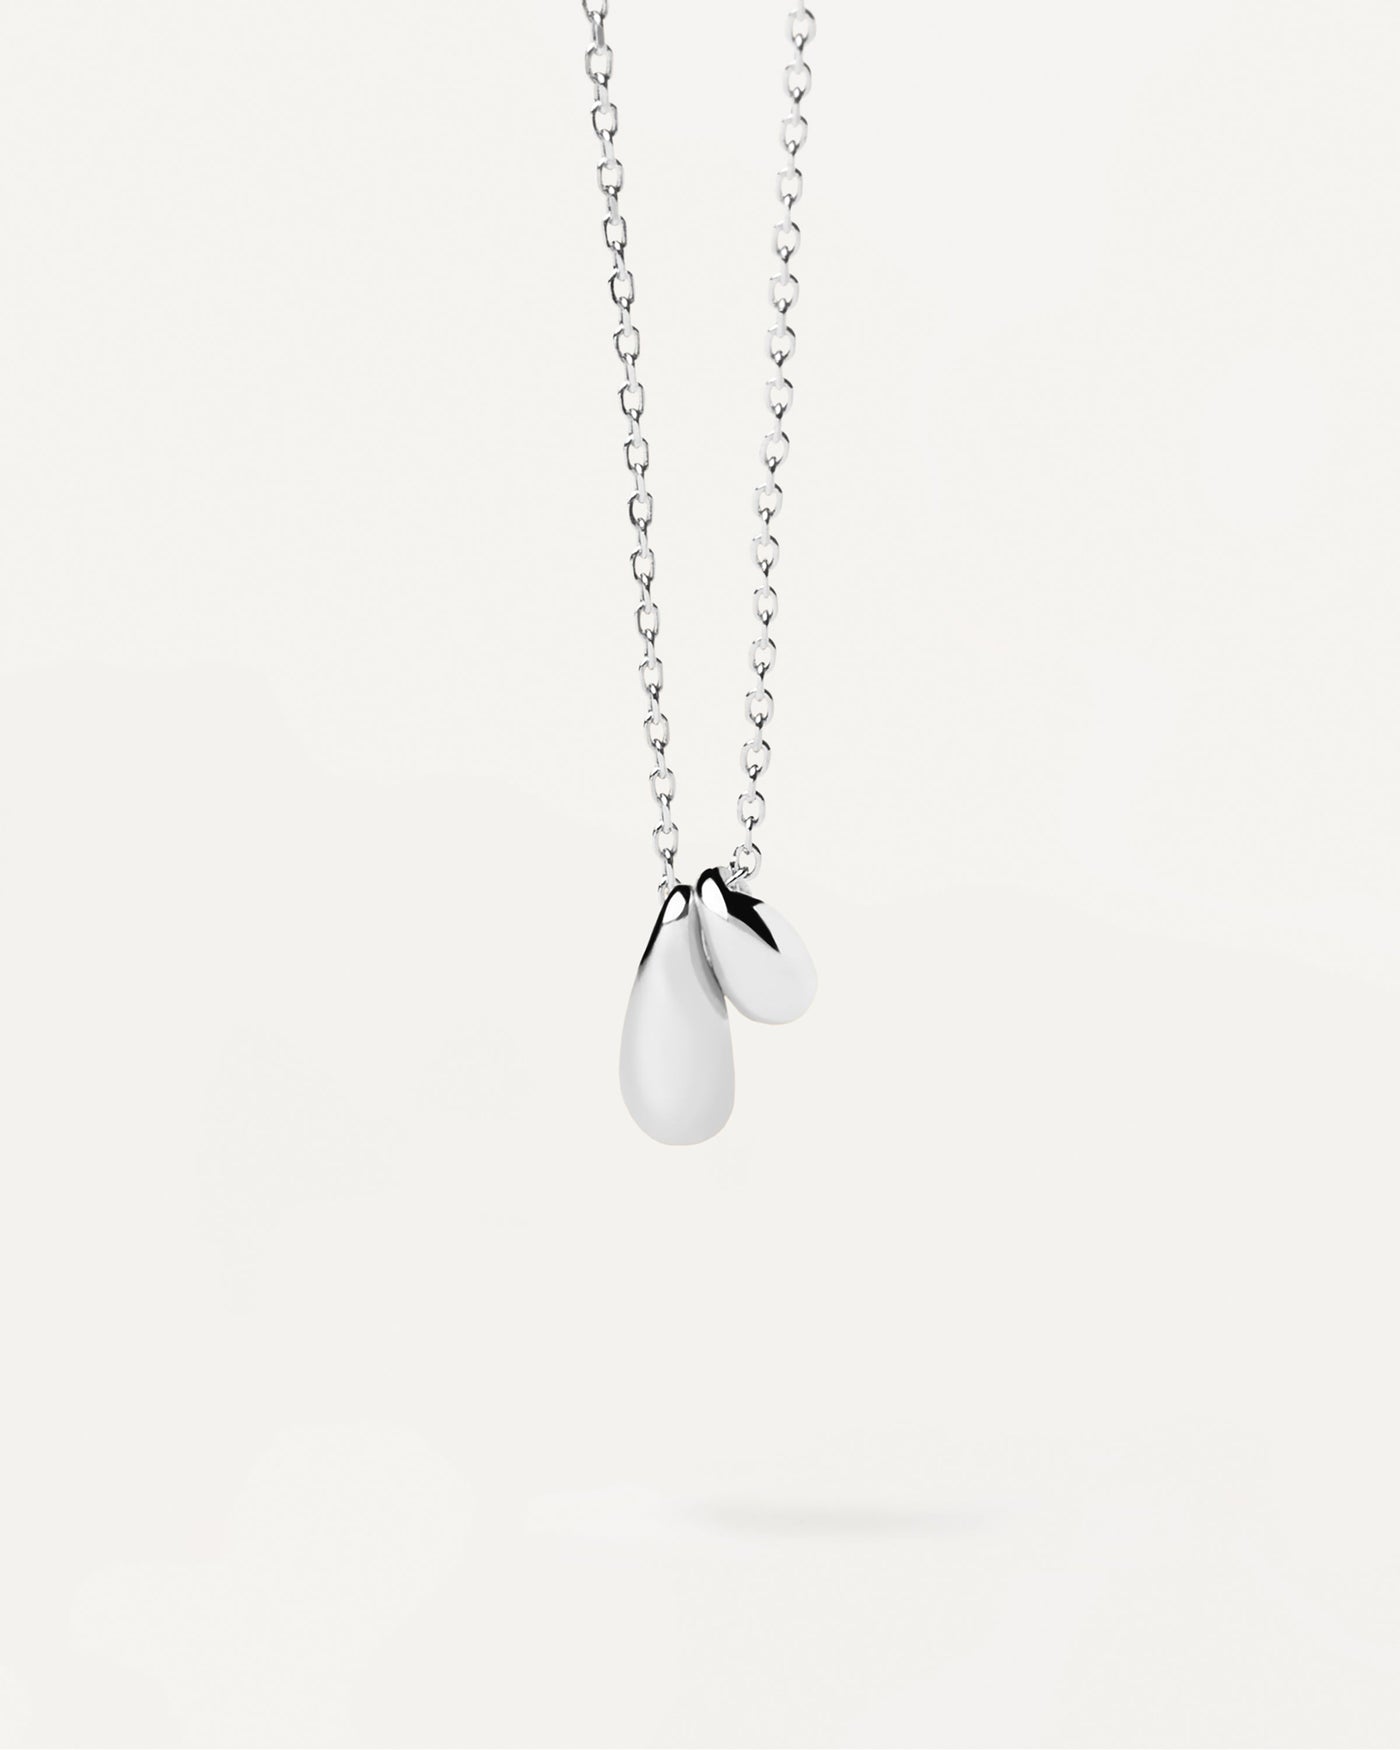 2023 Selection | Sugar Silver Necklace. Sterling silver necklace with two drop pendants. Get the latest arrival from PDPAOLA. Place your order safely and get this Best Seller. Free Shipping.